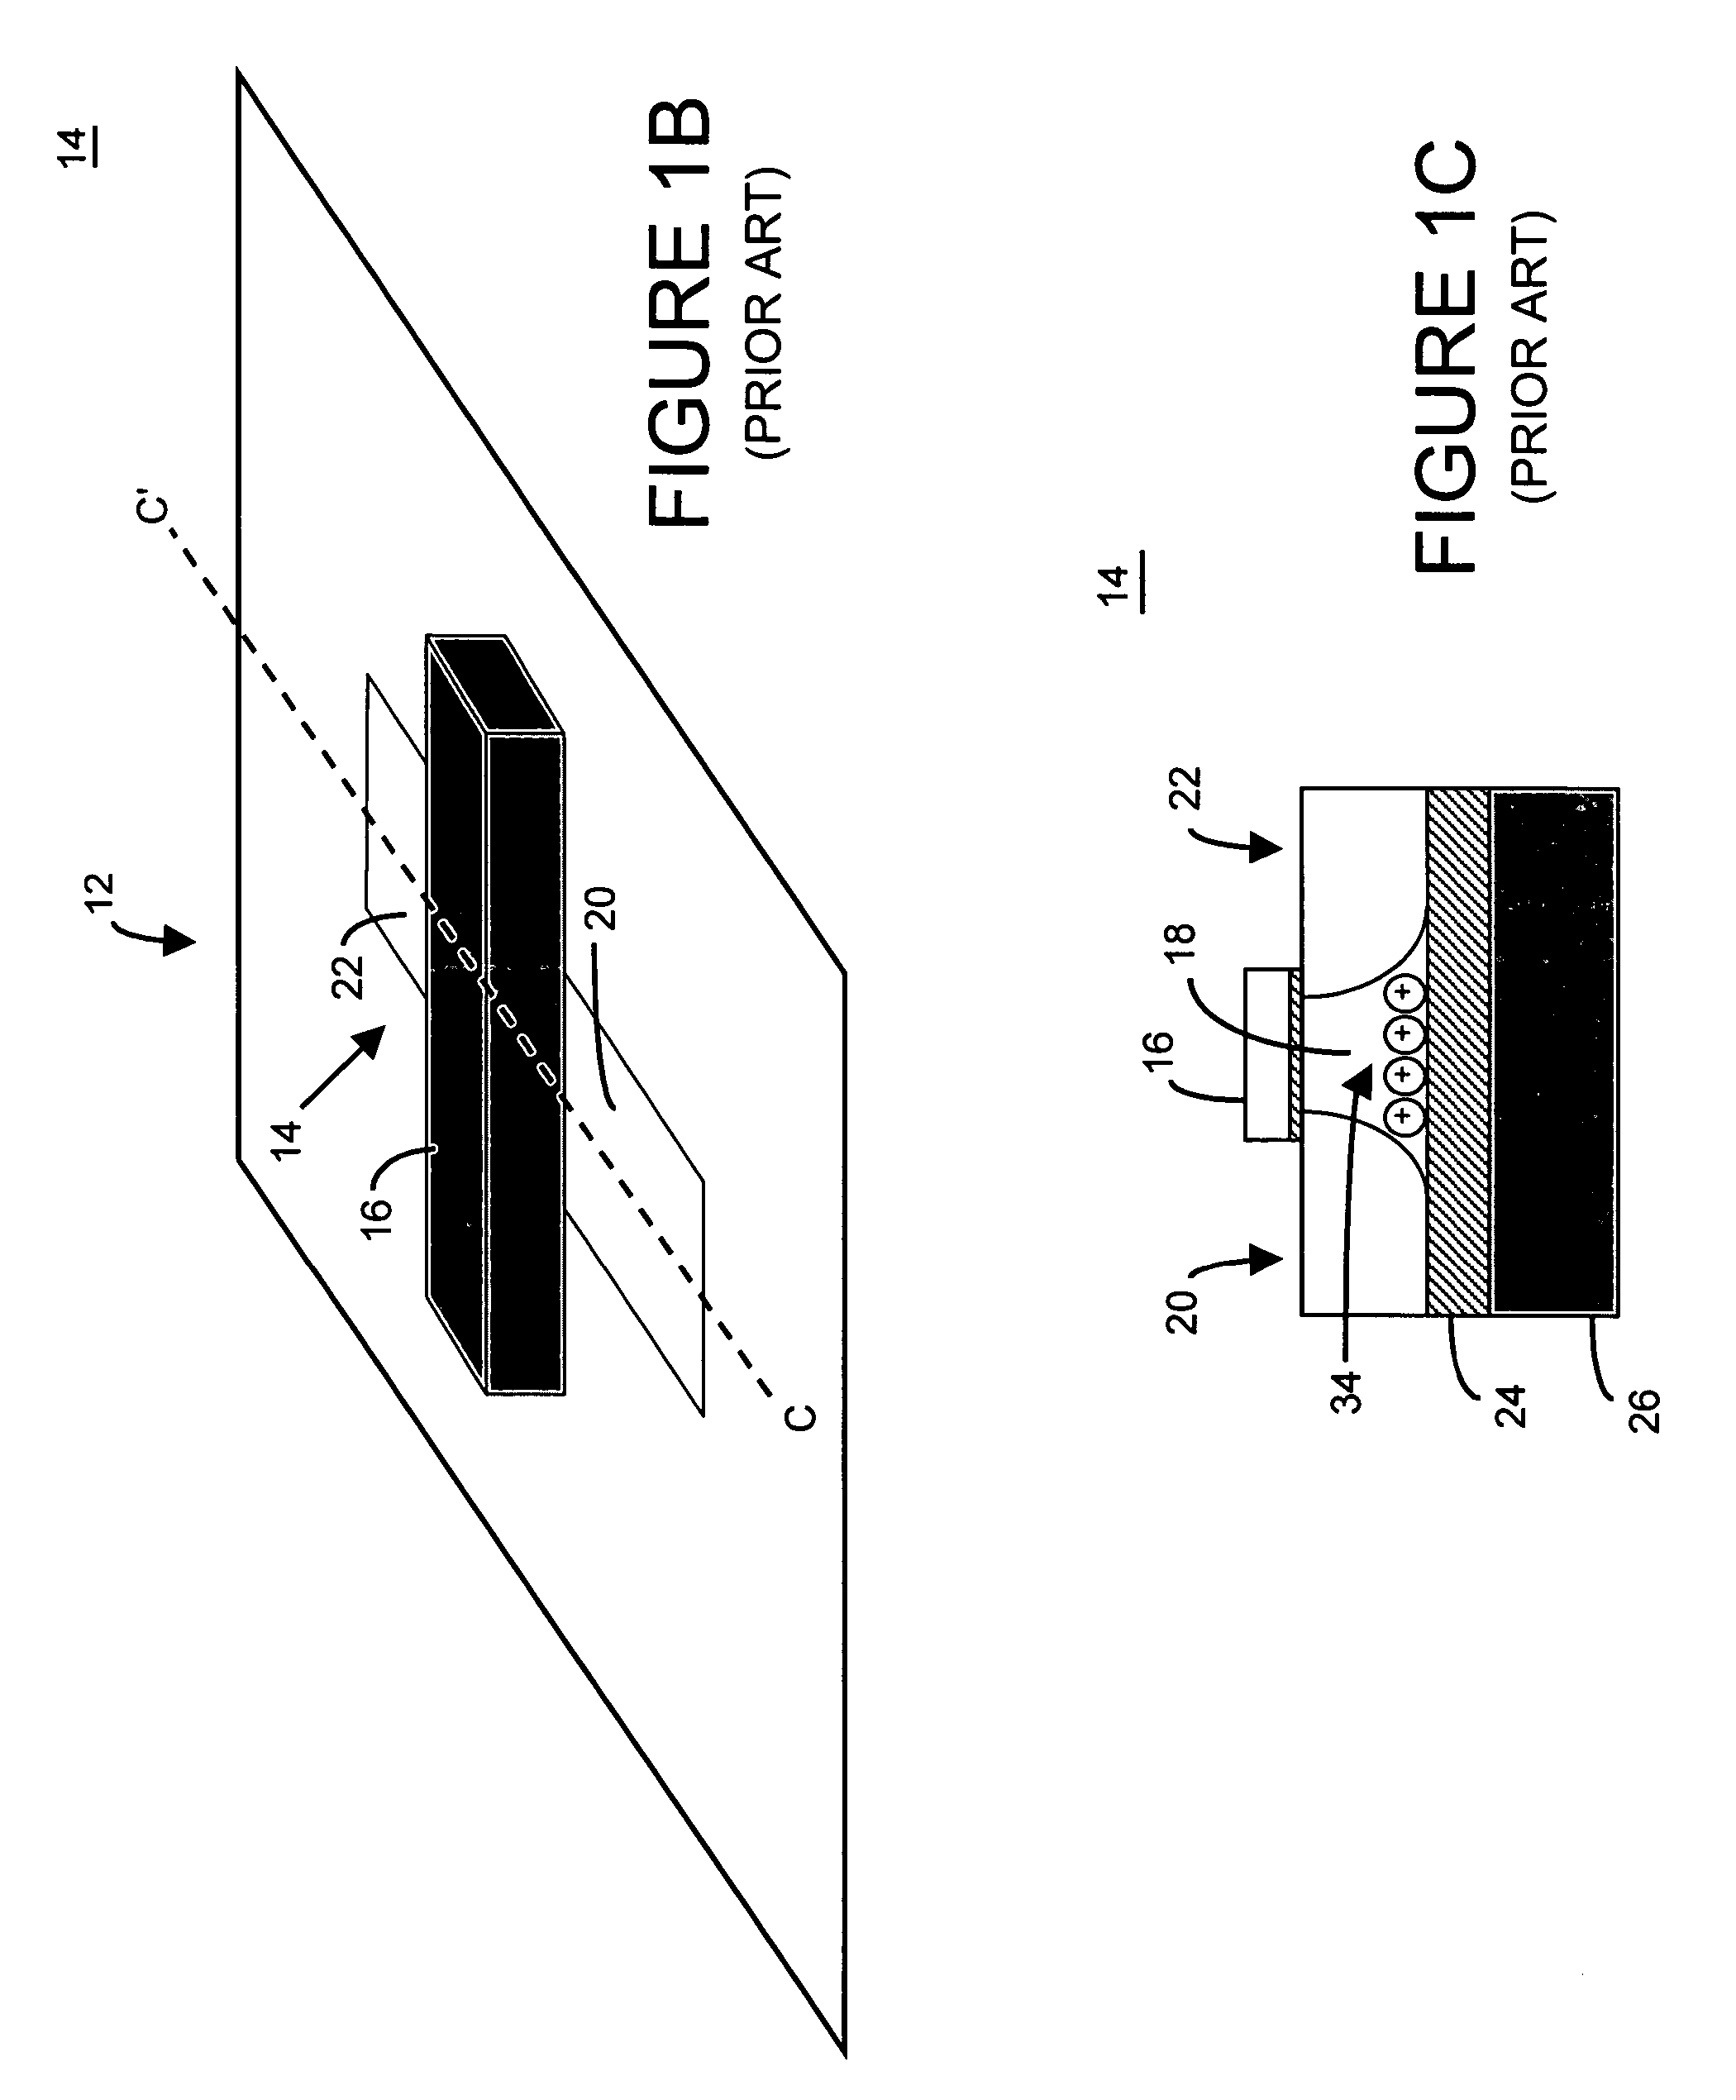 Sense amplifier circuitry and architecture to write data into and/or read from memory cells